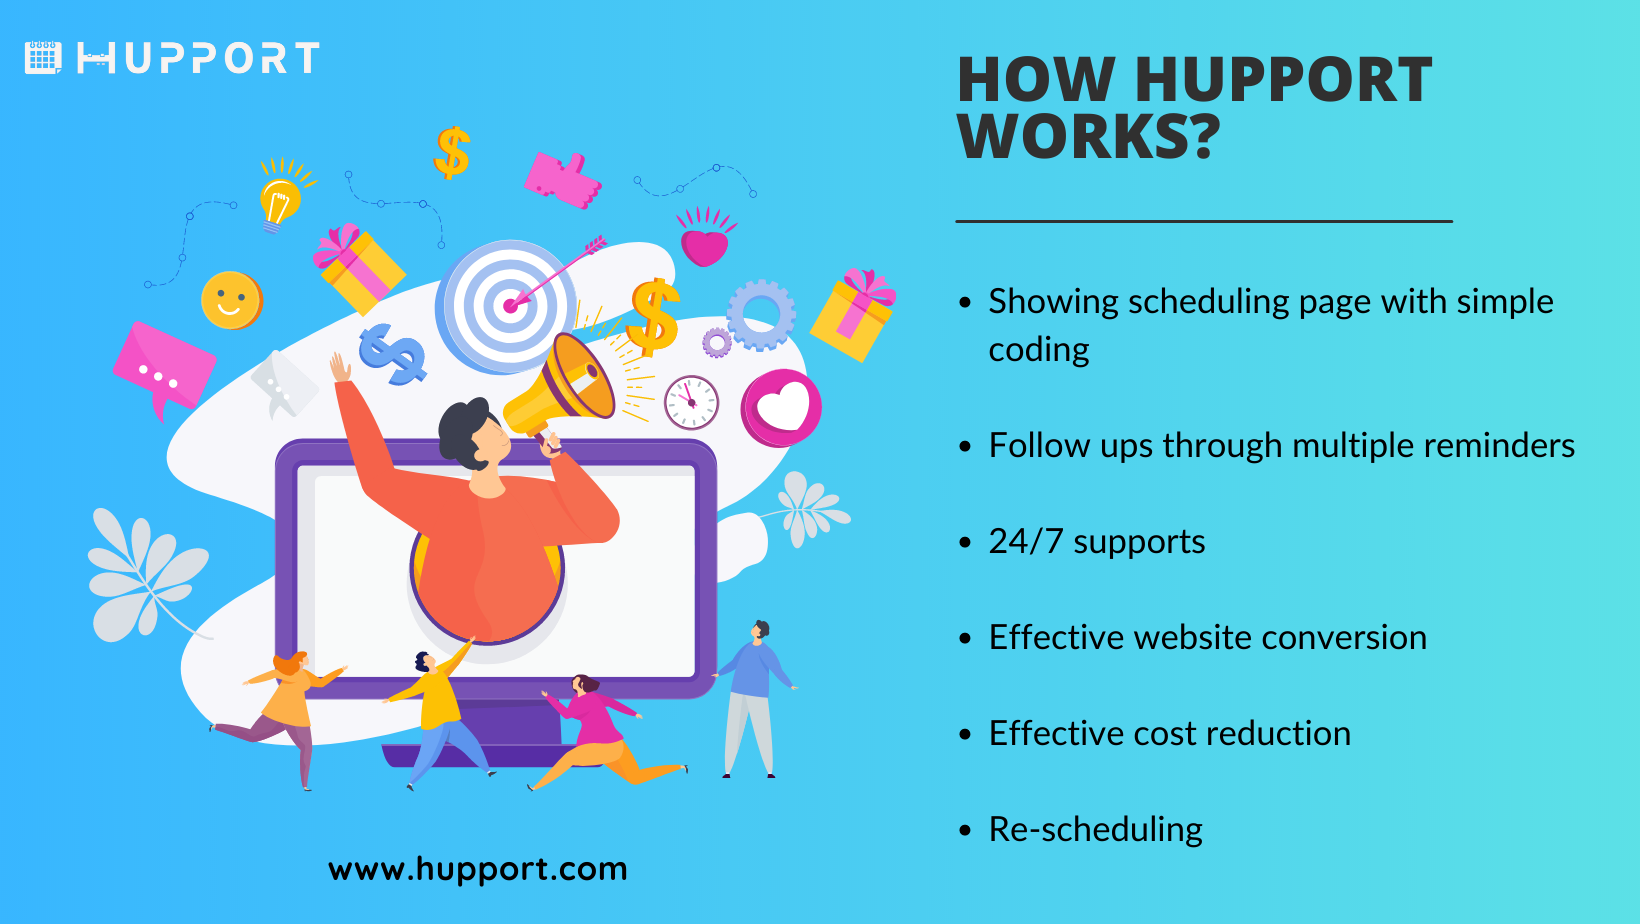 How Hupport works